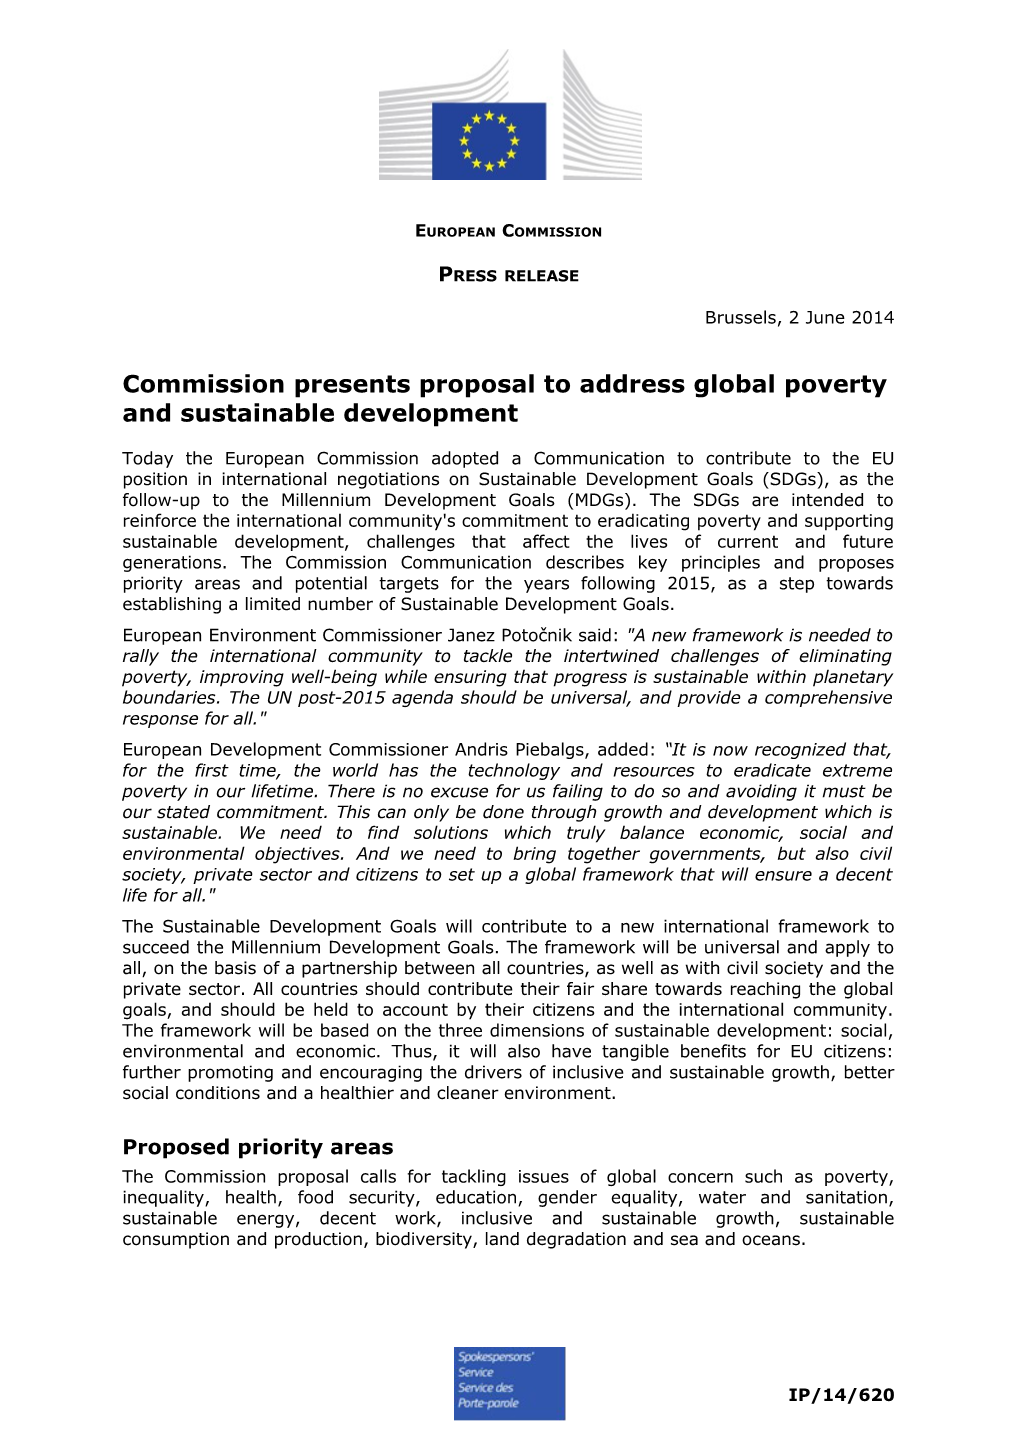 Commission Presents Proposal to Address Global Poverty and Sustainable Development